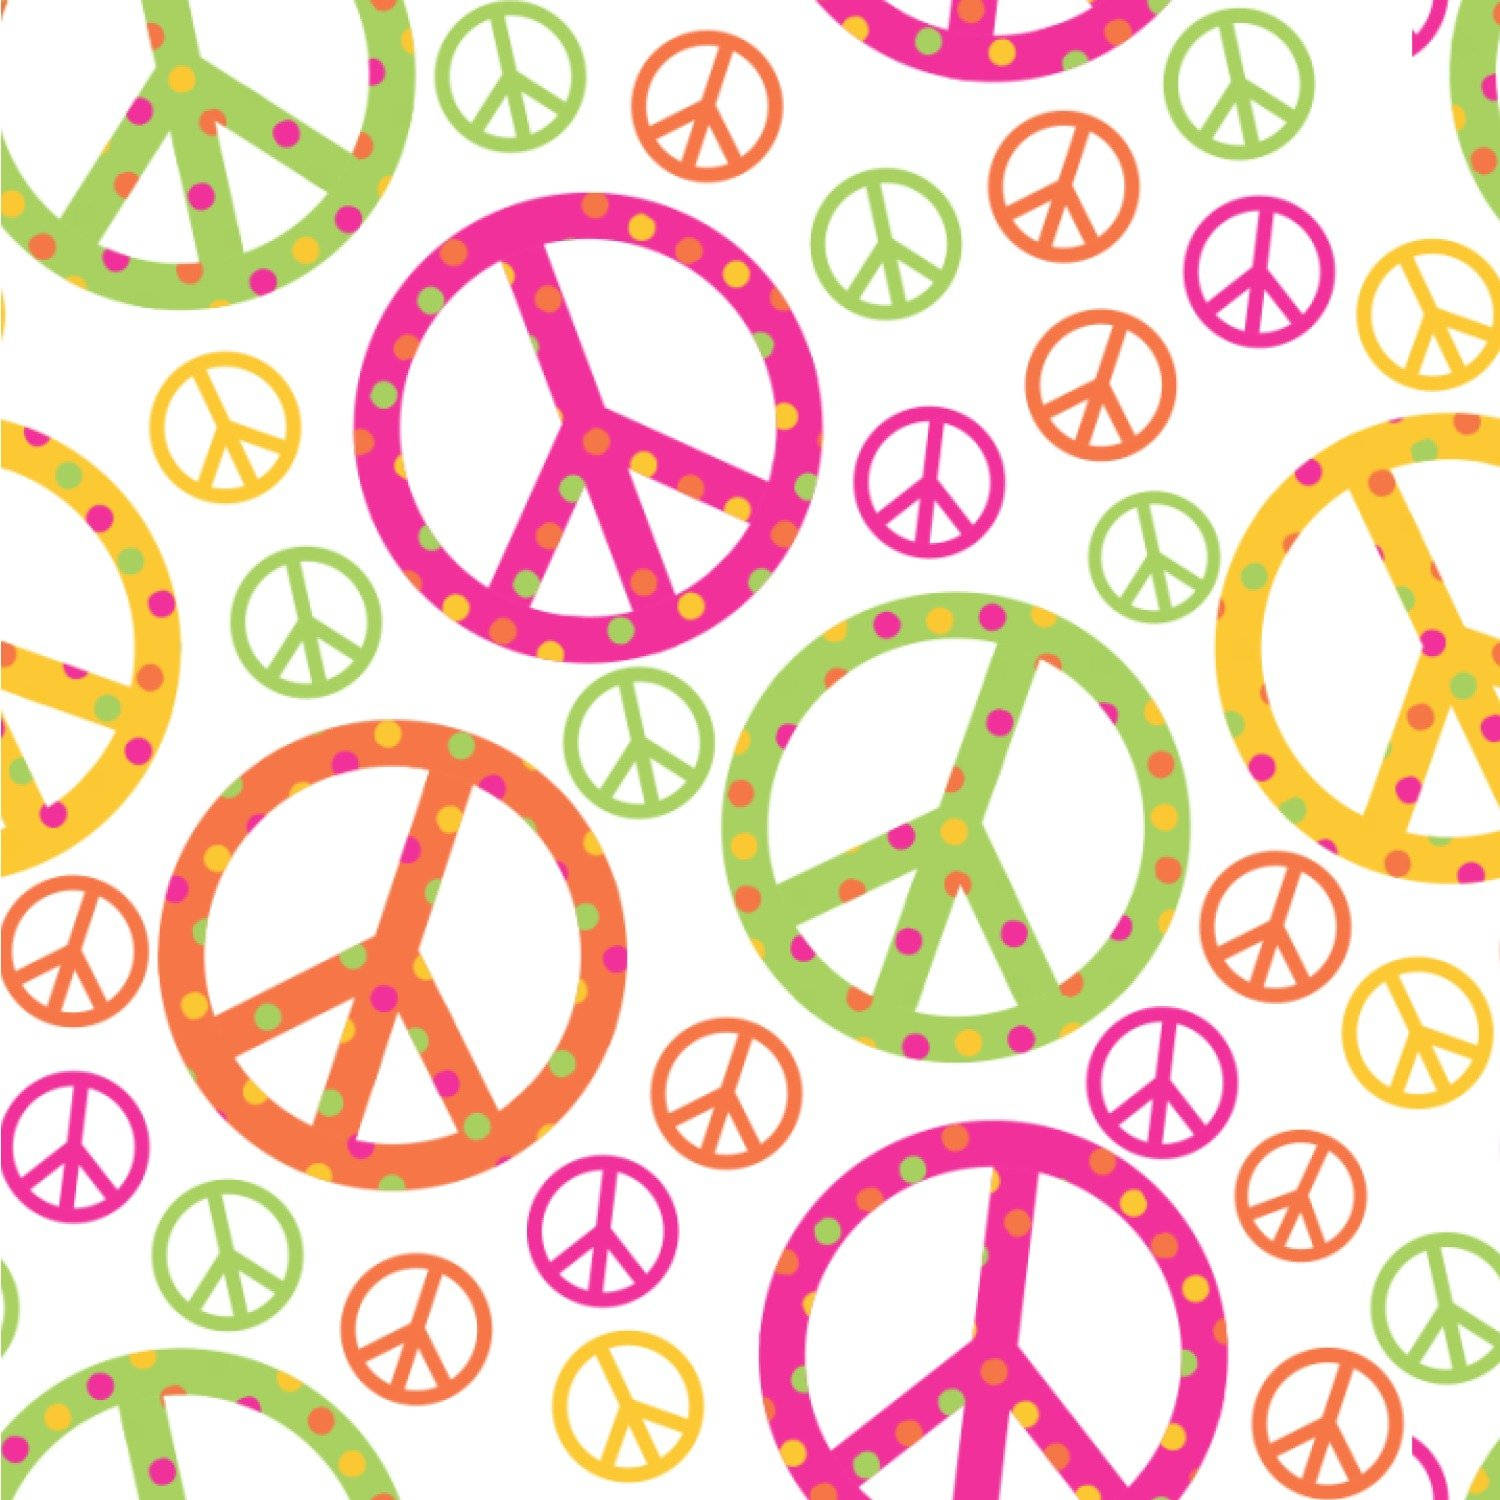 Free Peace Symbol Wallpaper Downloads, [100+] Peace Symbol Wallpapers for  FREE 